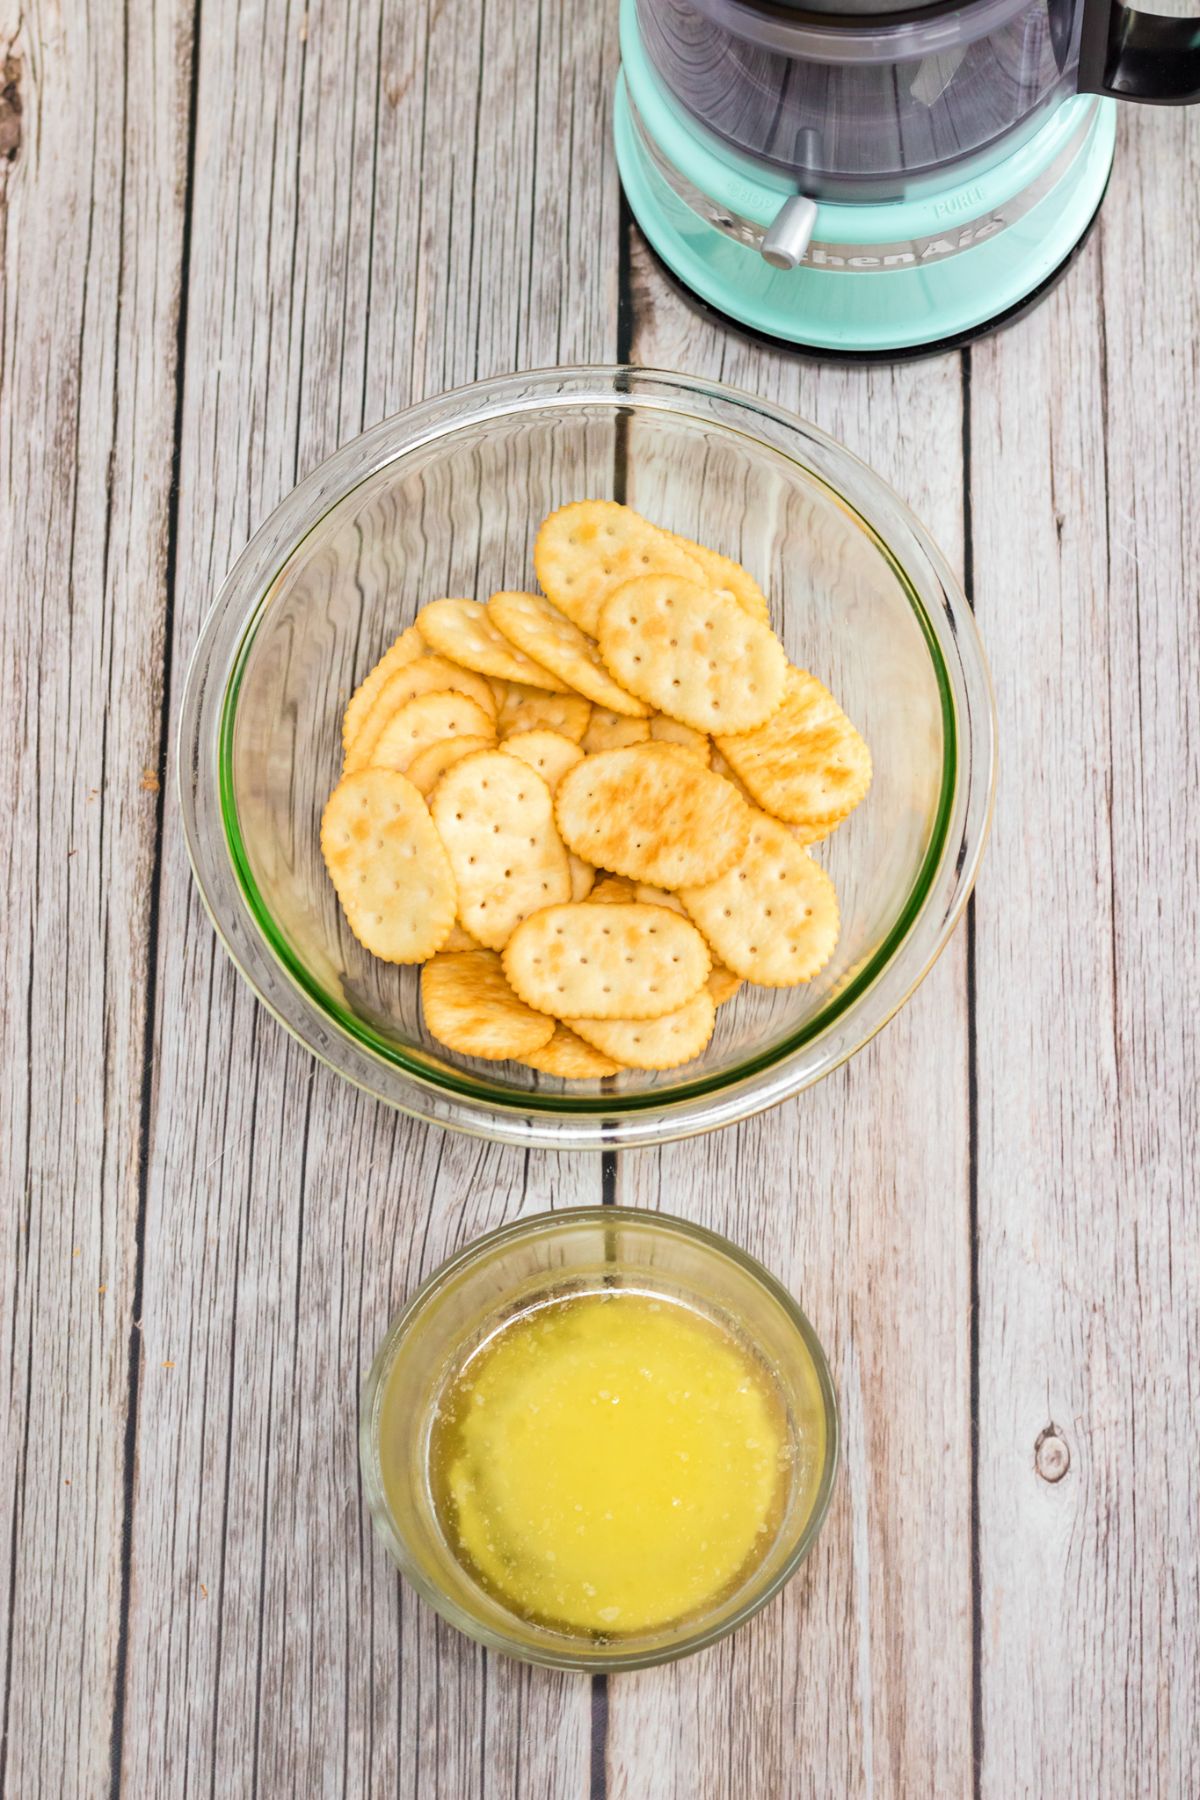 Crackers and lemon juice in clear glass bowls on a wood table